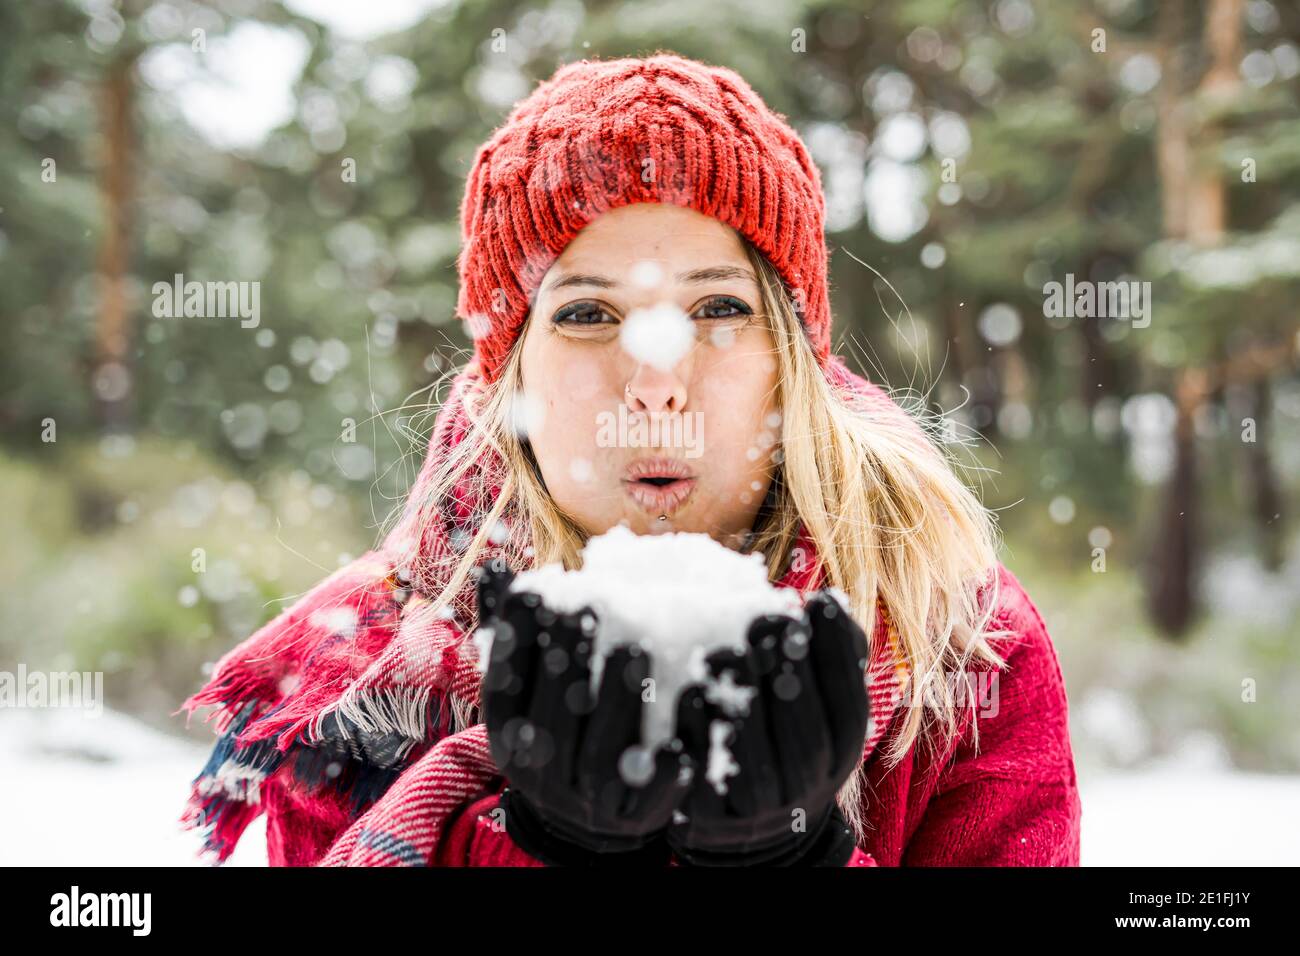 Portrait of happy young woman playing with snow in winter, blowing snowflakes to camera, copy space Stock Photo